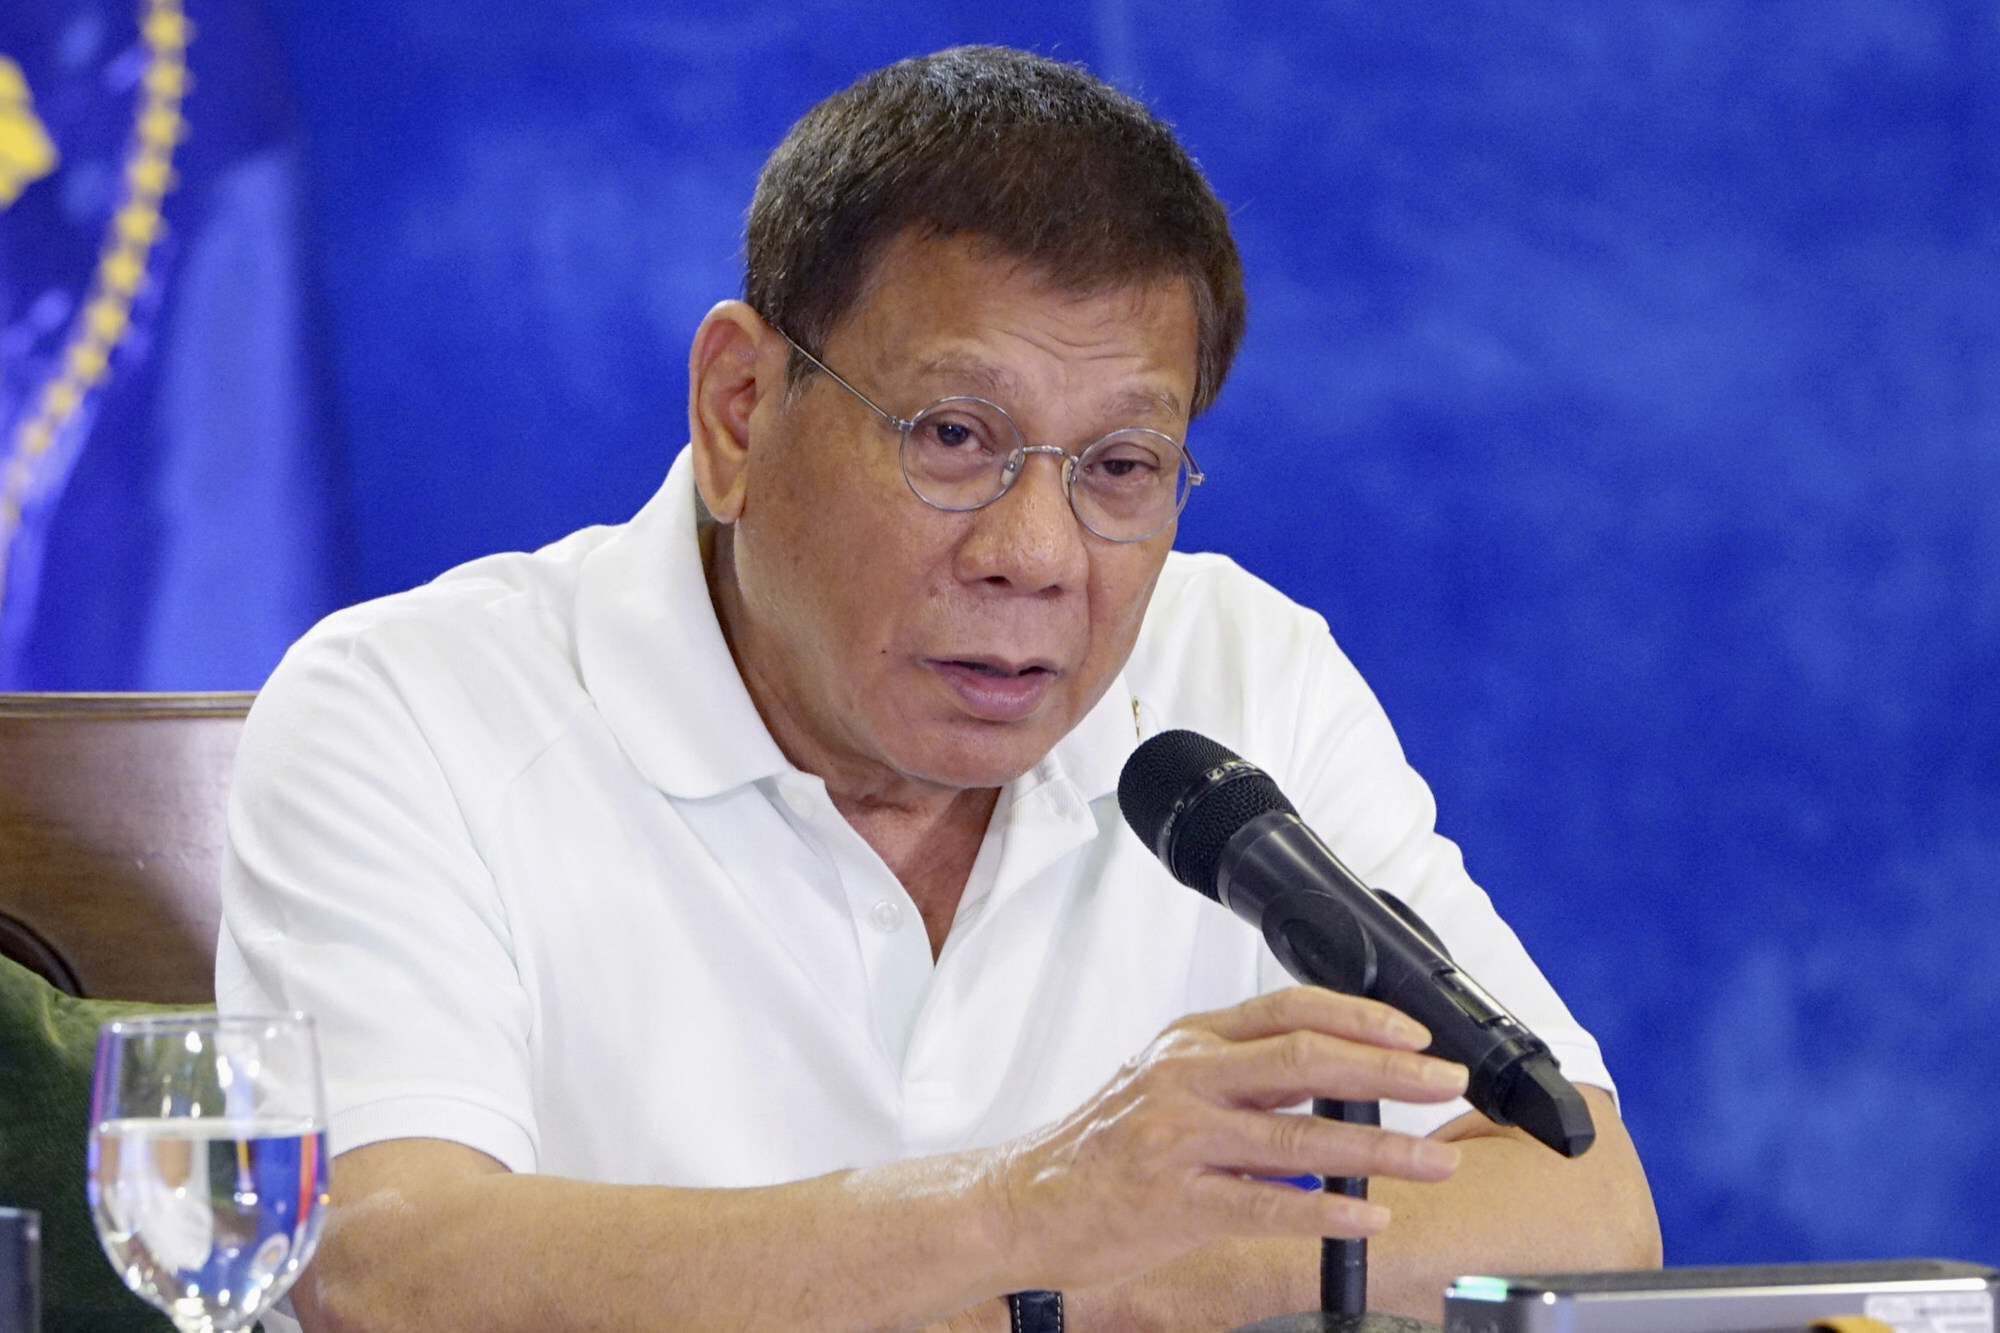 President Duterte has said he will talk to the Chinese ambassador about the issue. Photo: AP